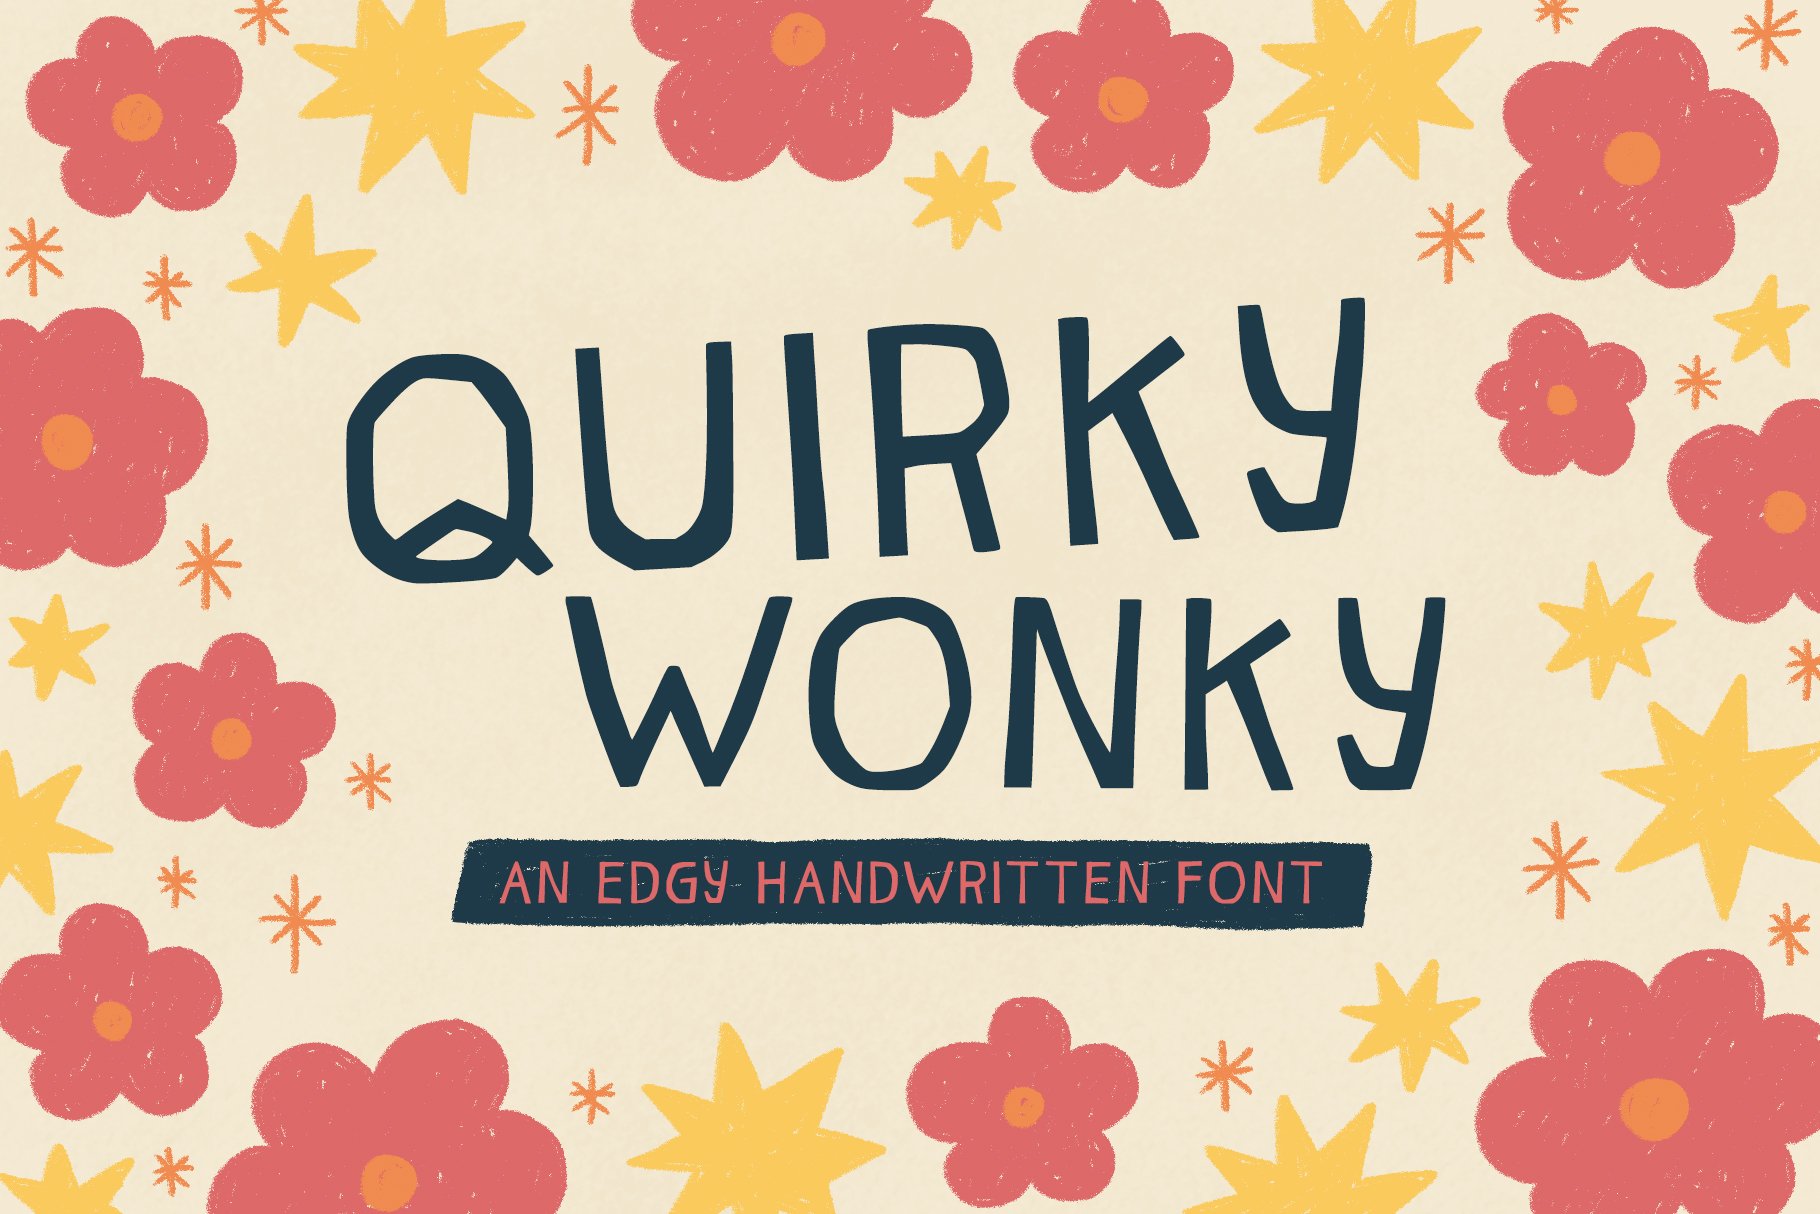 Quirky Wonky - Handwritten font cover image.